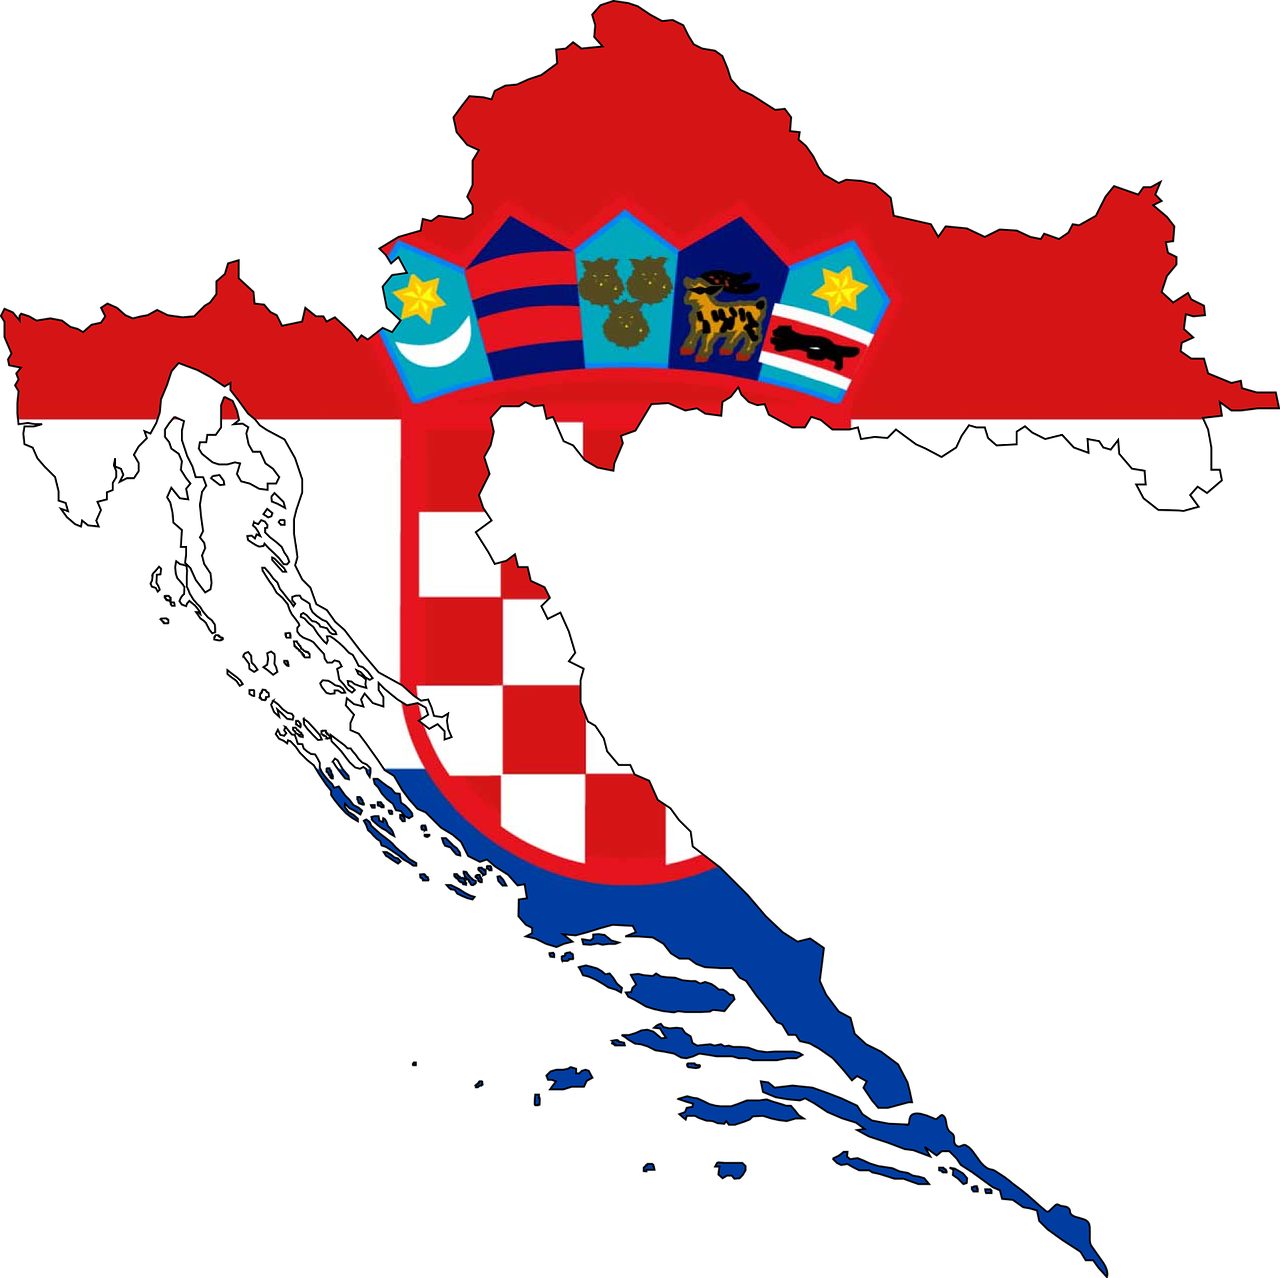 Croatians to vote on euro motif from 5 choices